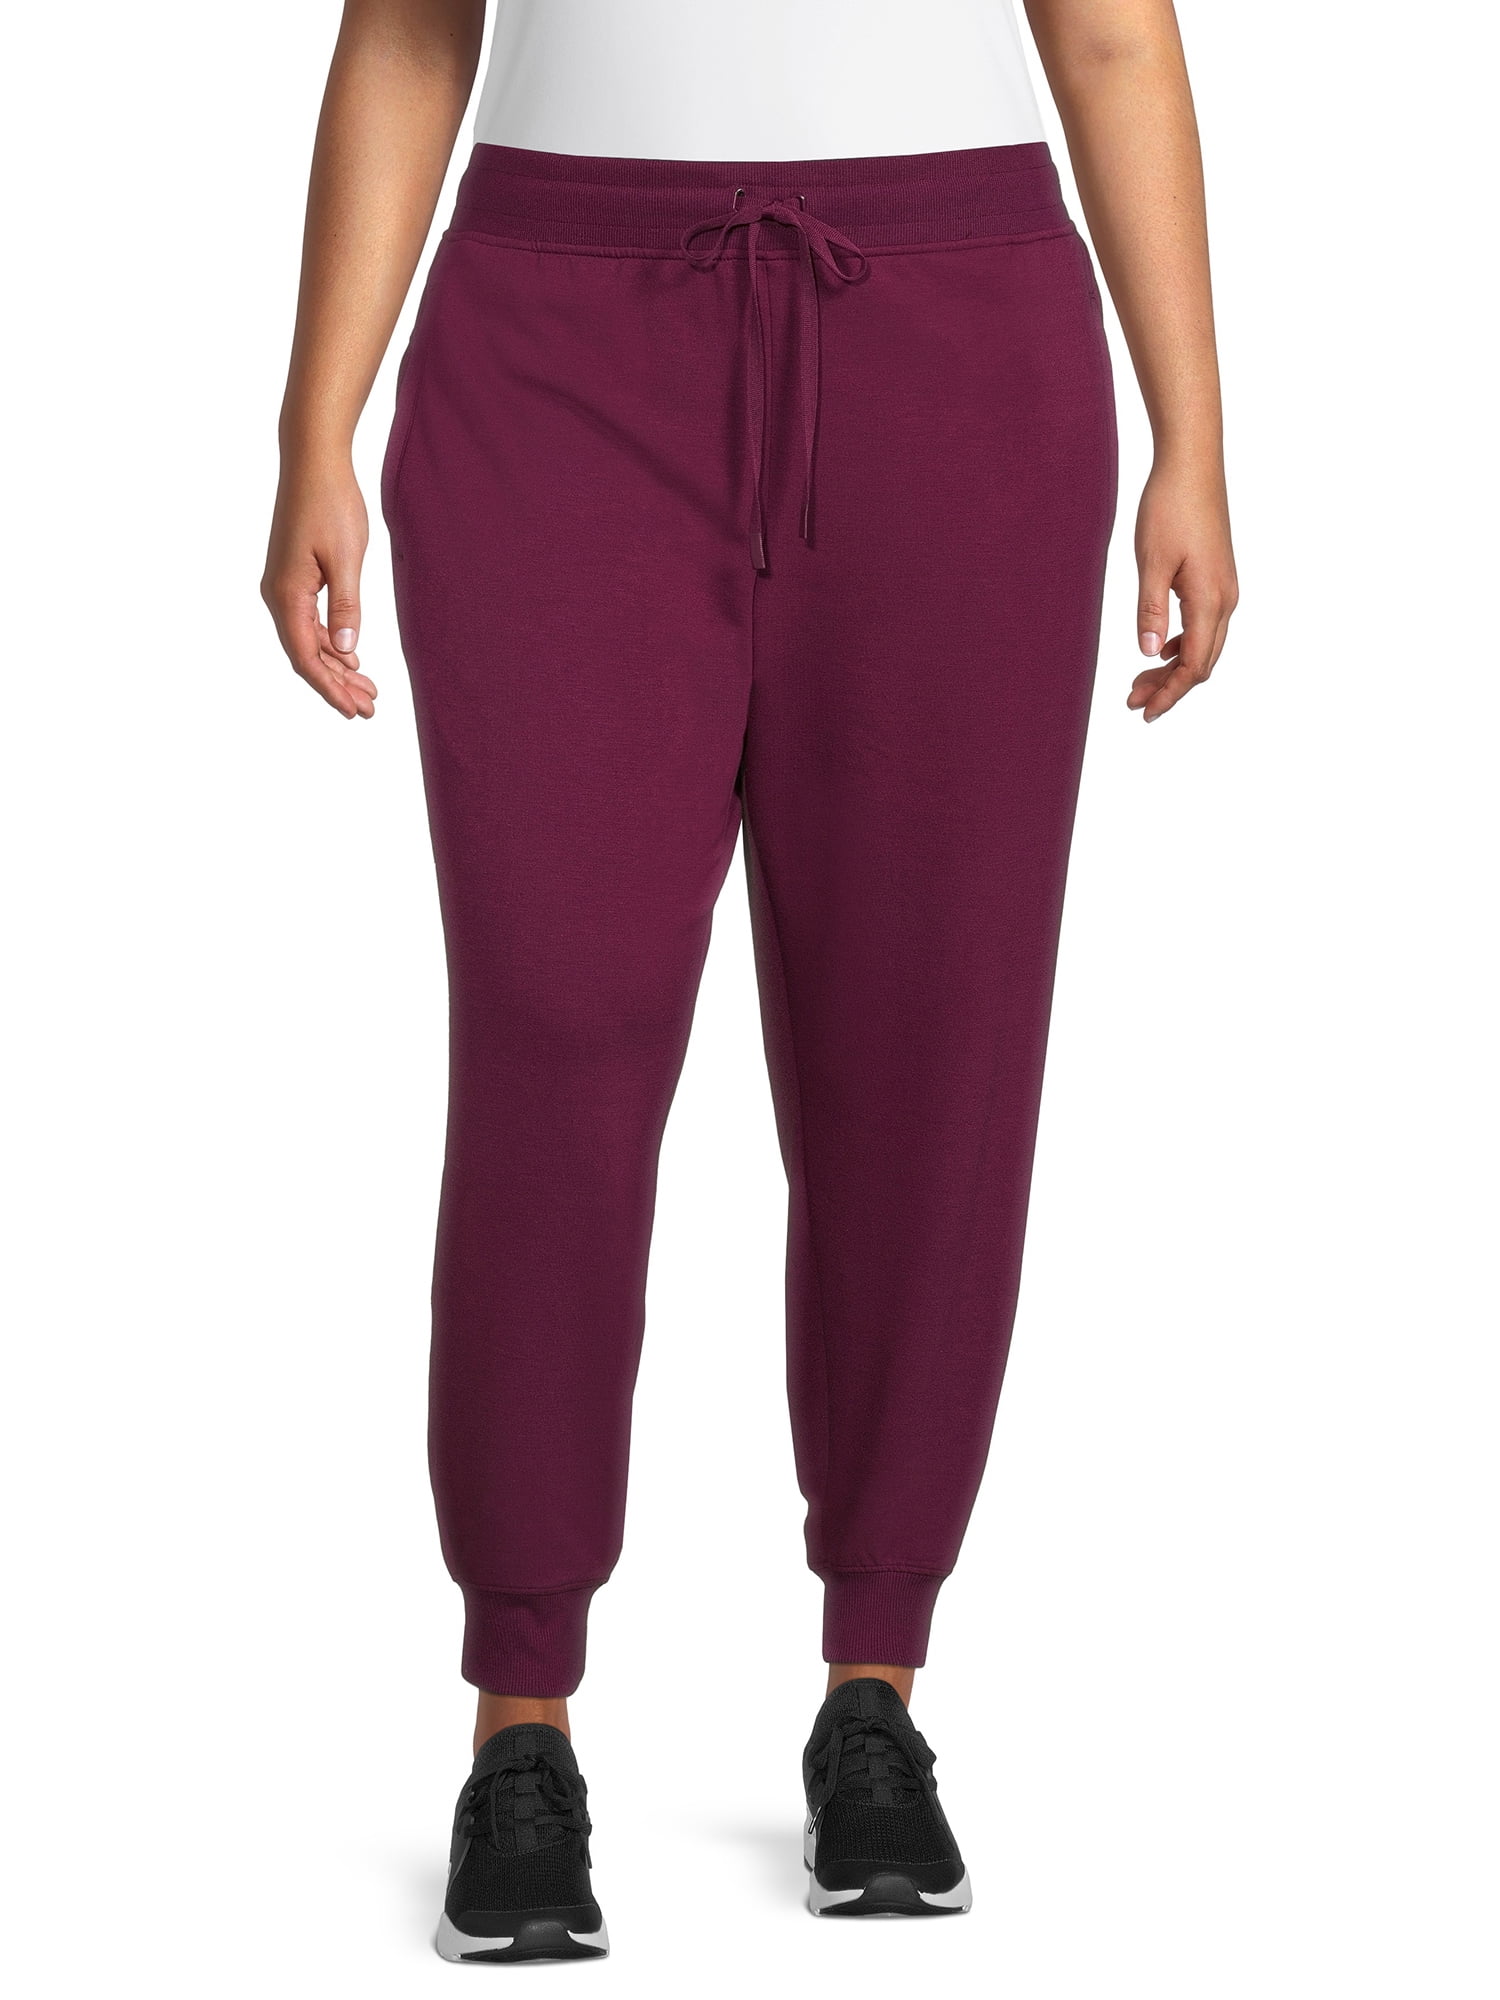 Athletic Works Women's Plus Size Pull-On Jogger Pants - Walmart